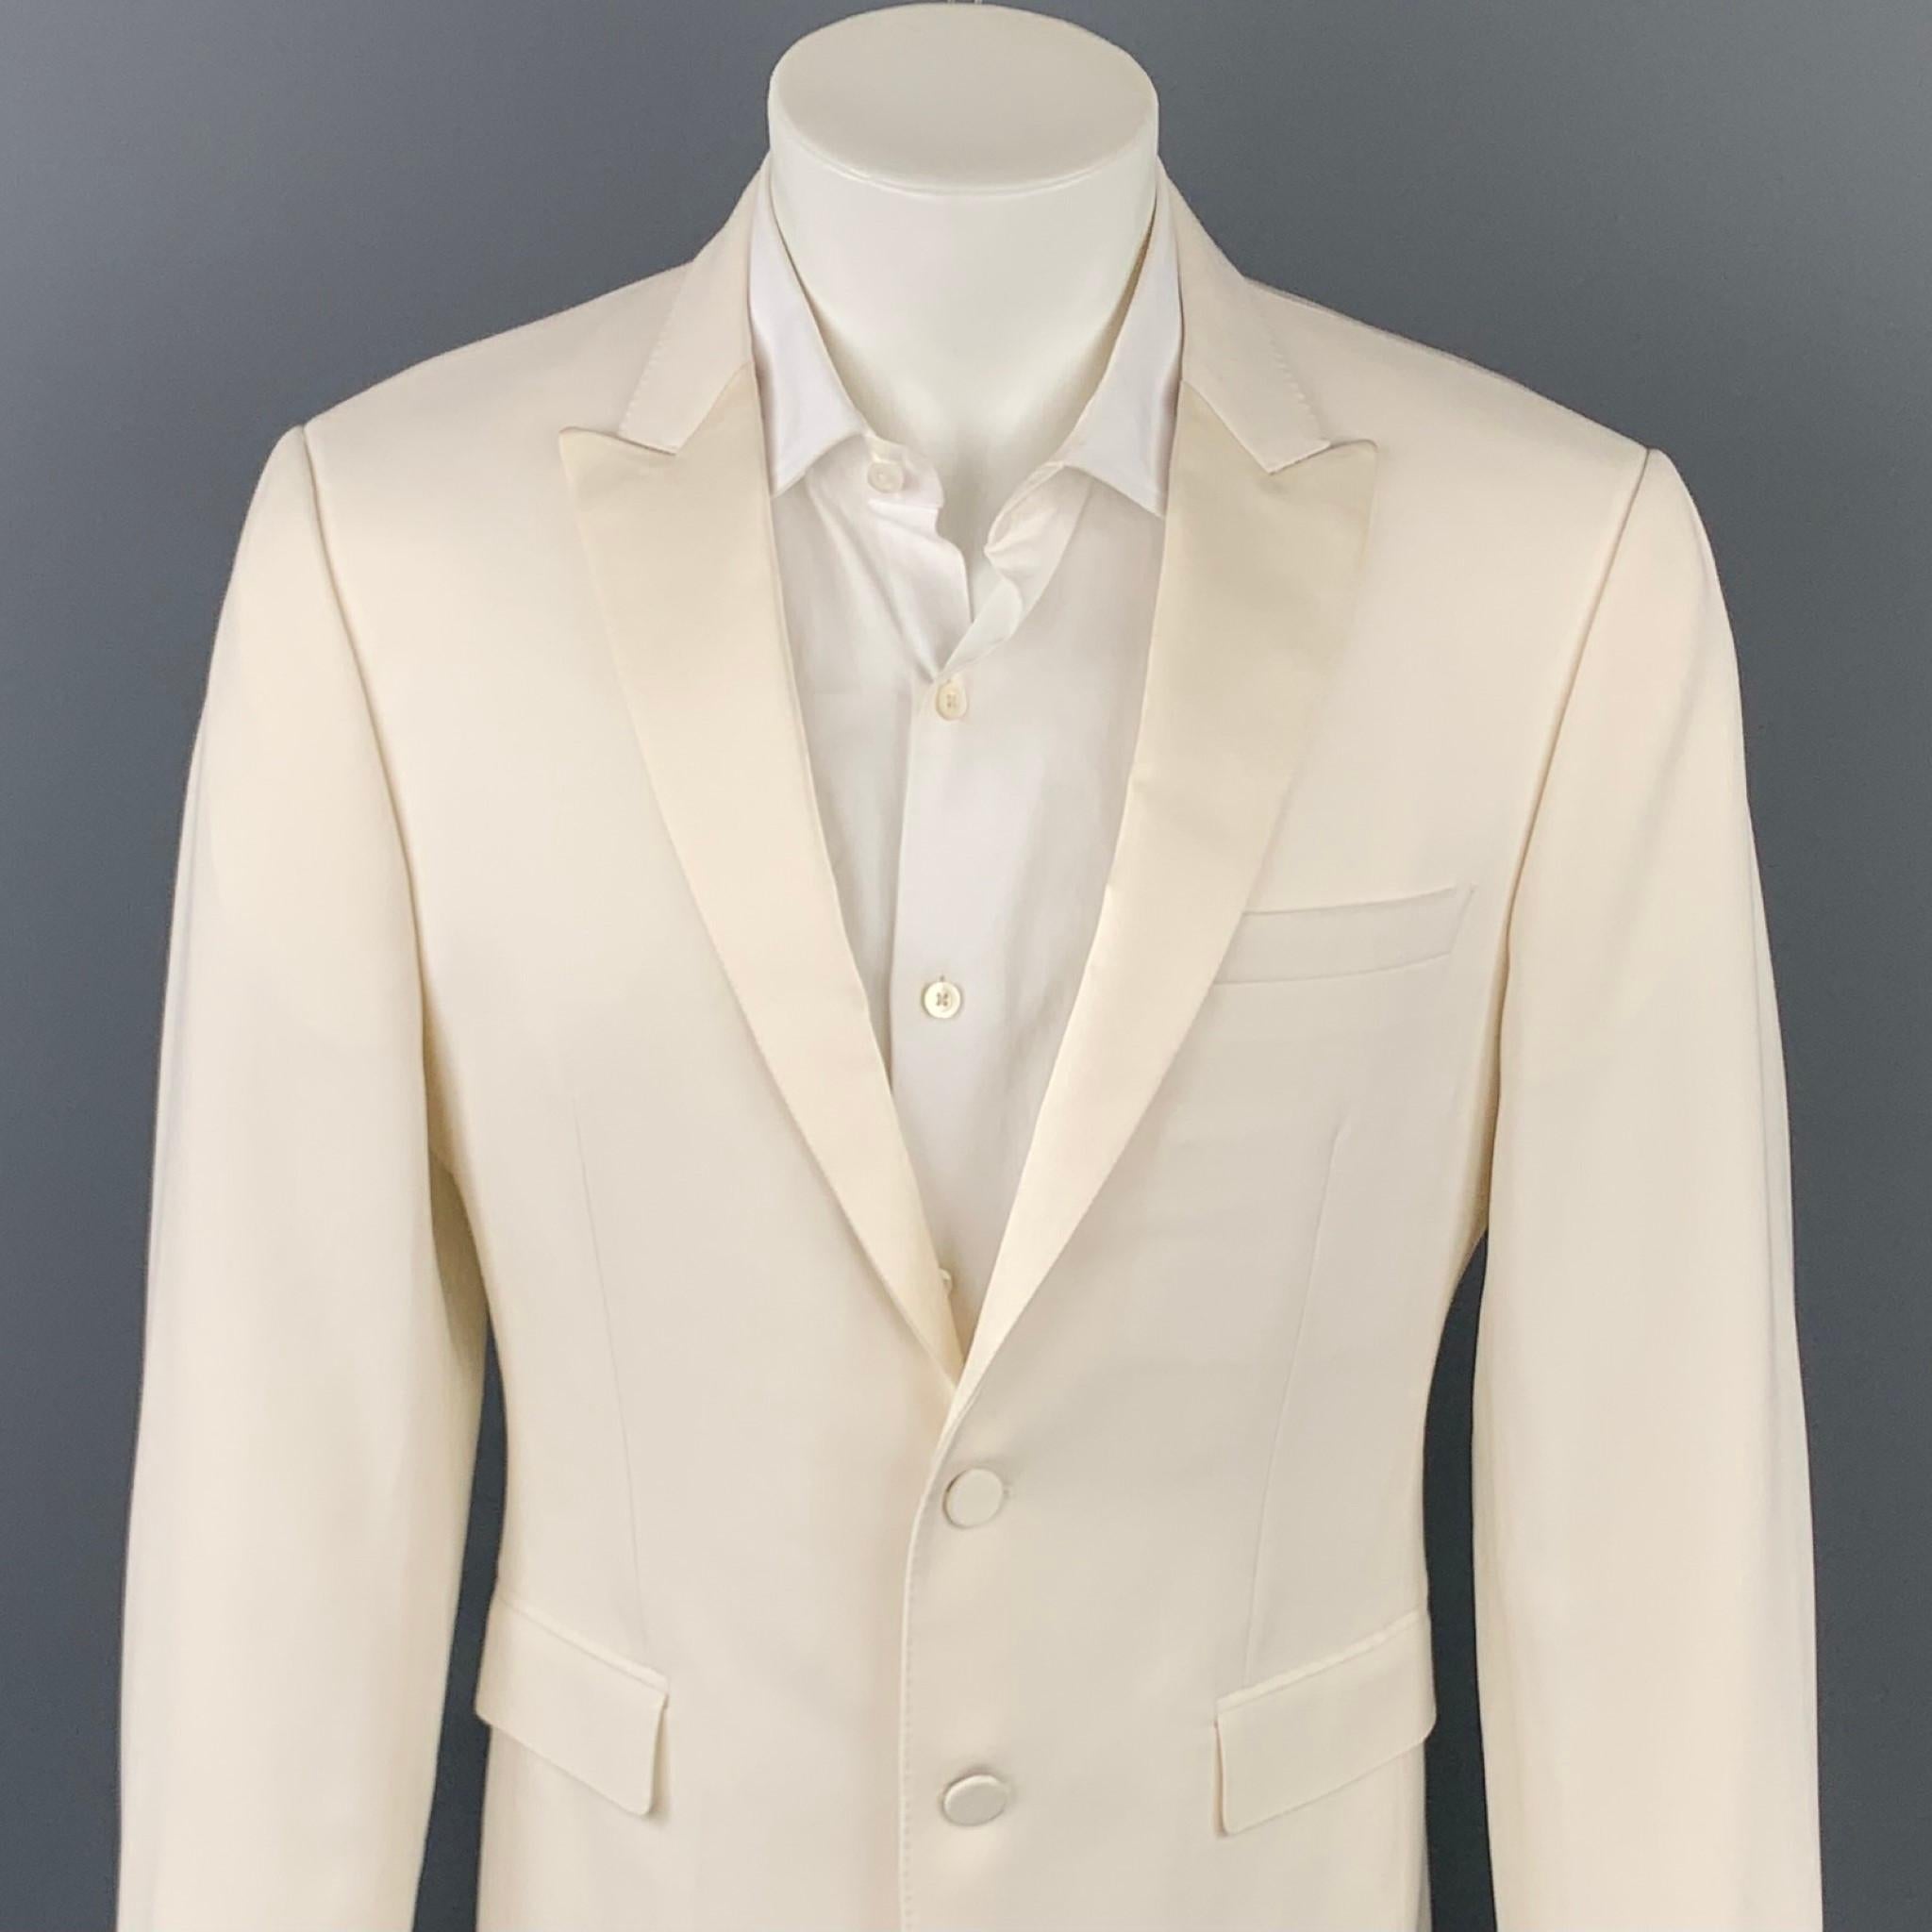 BURBERRY LONDON sport coat comes in a beige wool / mohair with a full liner featuring a peak lapel, flap pockets, and a two button closure. Made in Italy. 

Very Good Pre-Owned Condition.
Marked: 50

Measurements:

Shoulder: 18 in.
Chest: 40